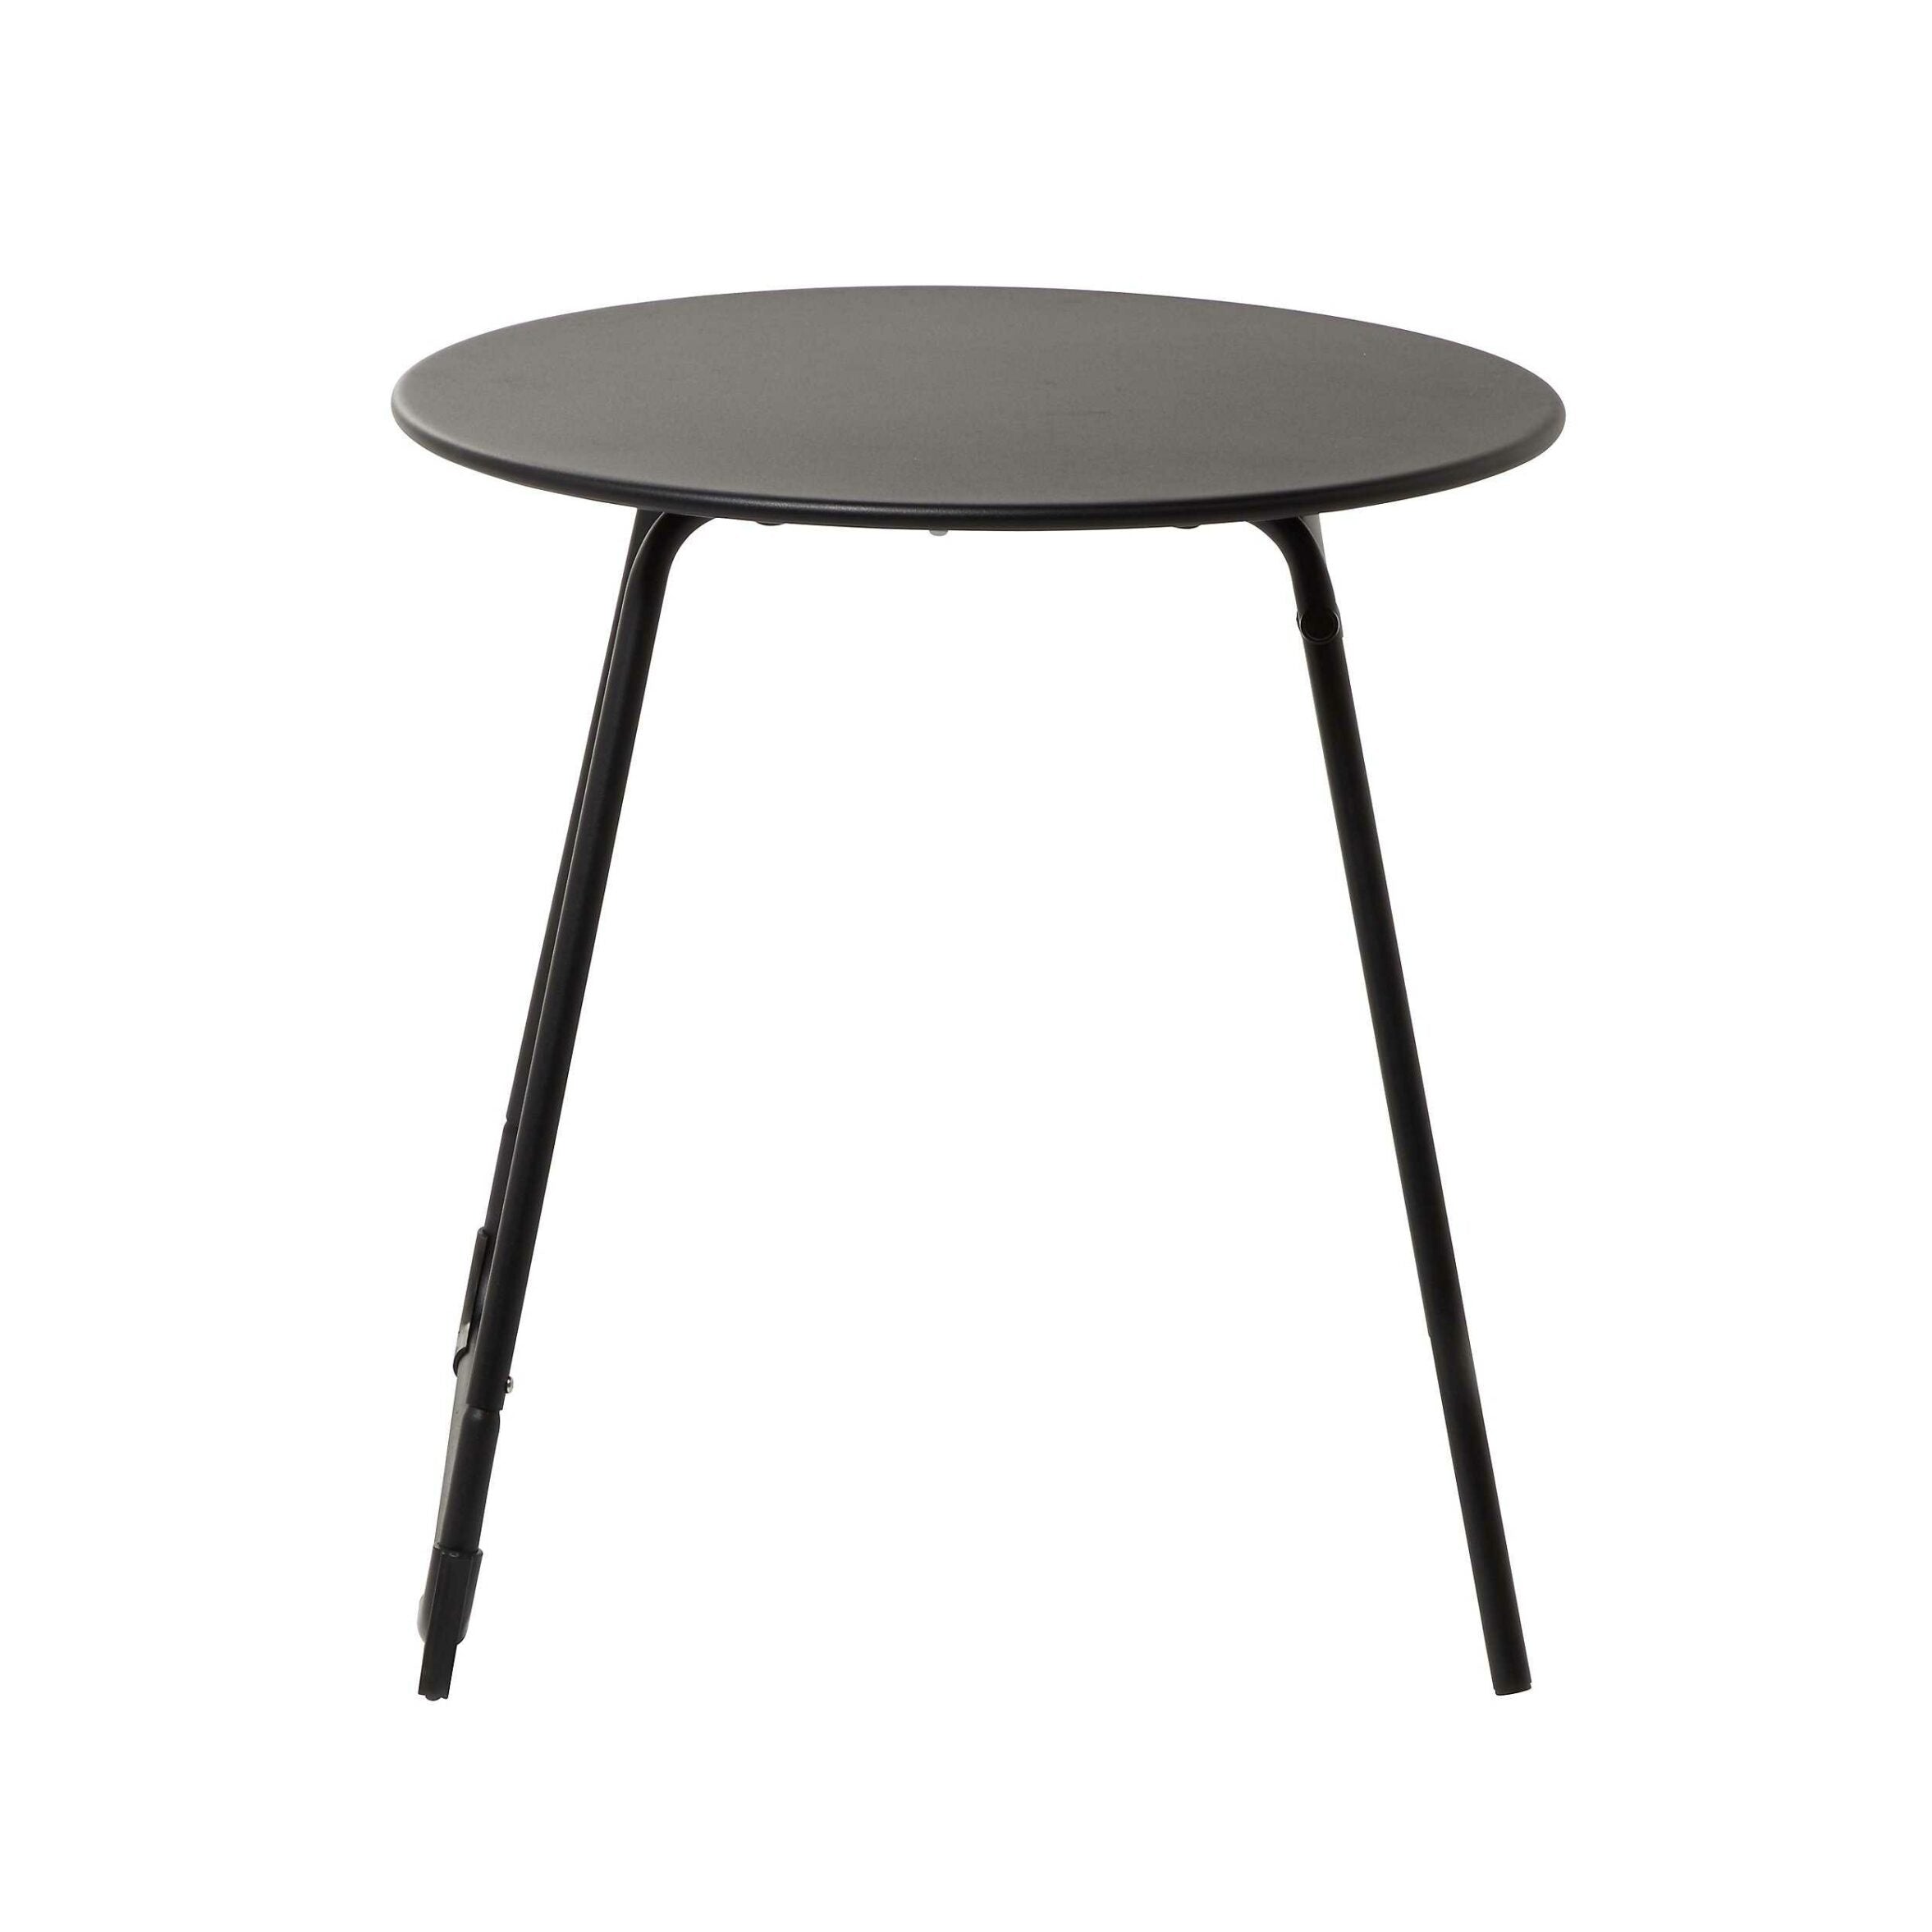 Garden Table GoodHome Morillo Metal Table Water resistant 500mm - Black - 4055